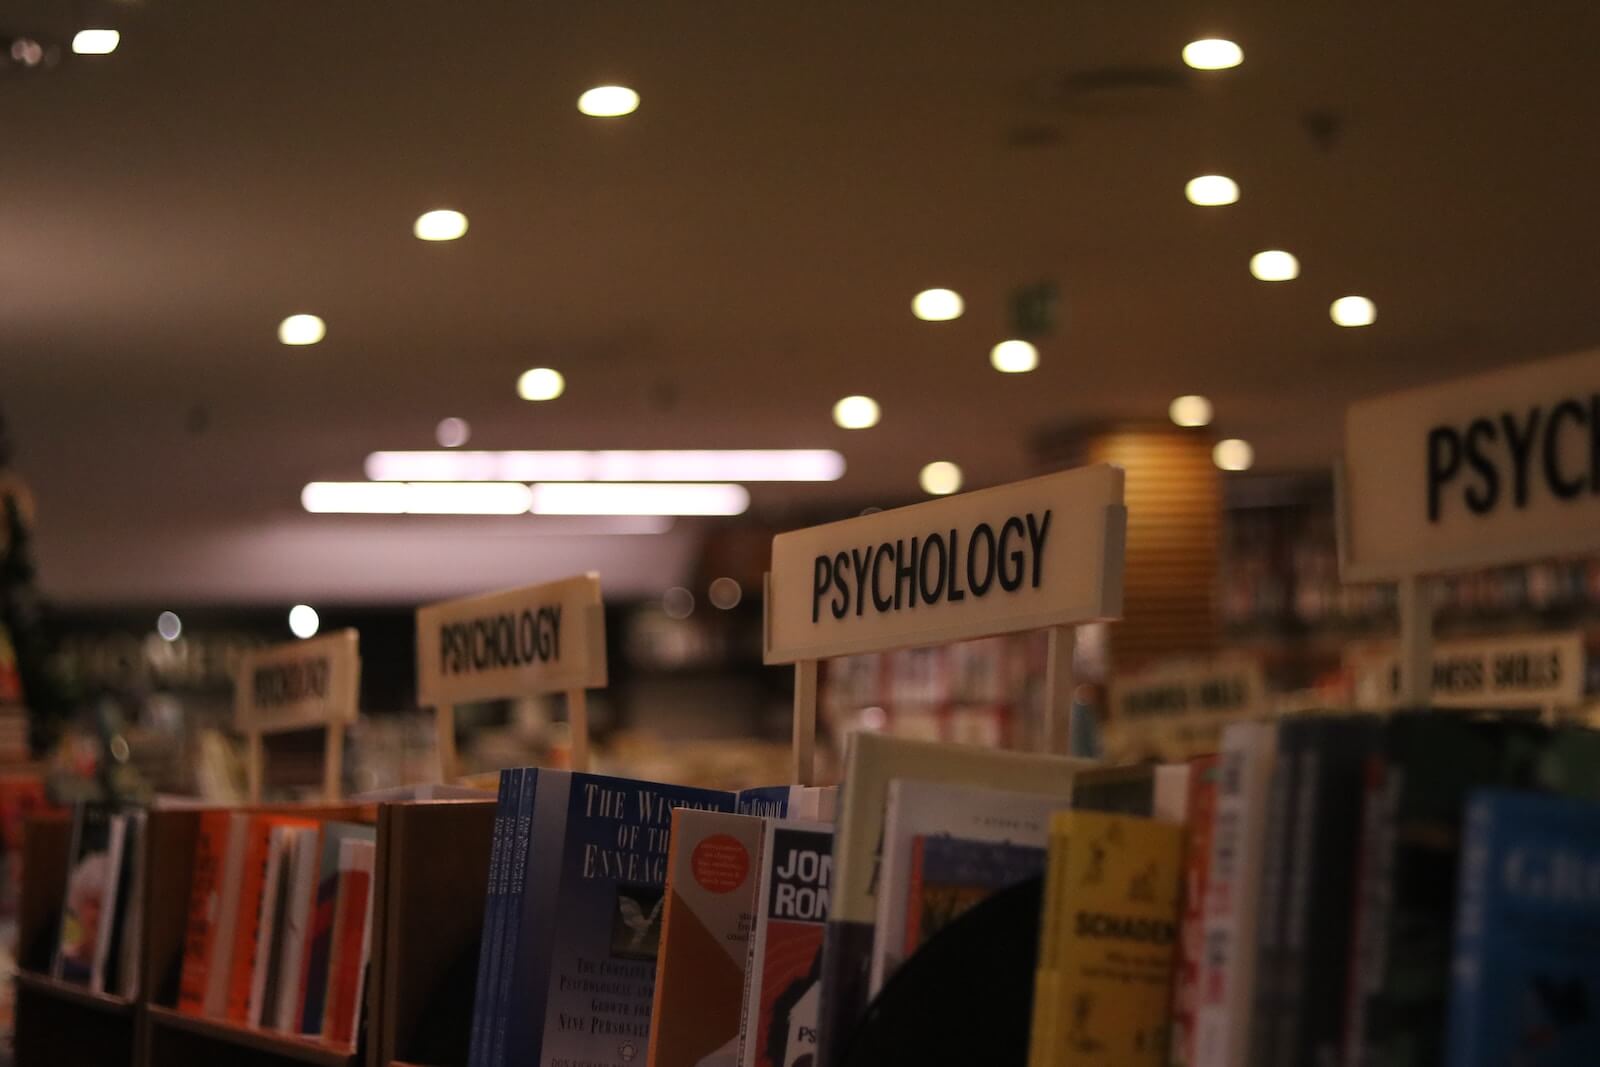 a row of psychology books on a shelf in a library photo by Alicia Christin Gerald on Unsplash